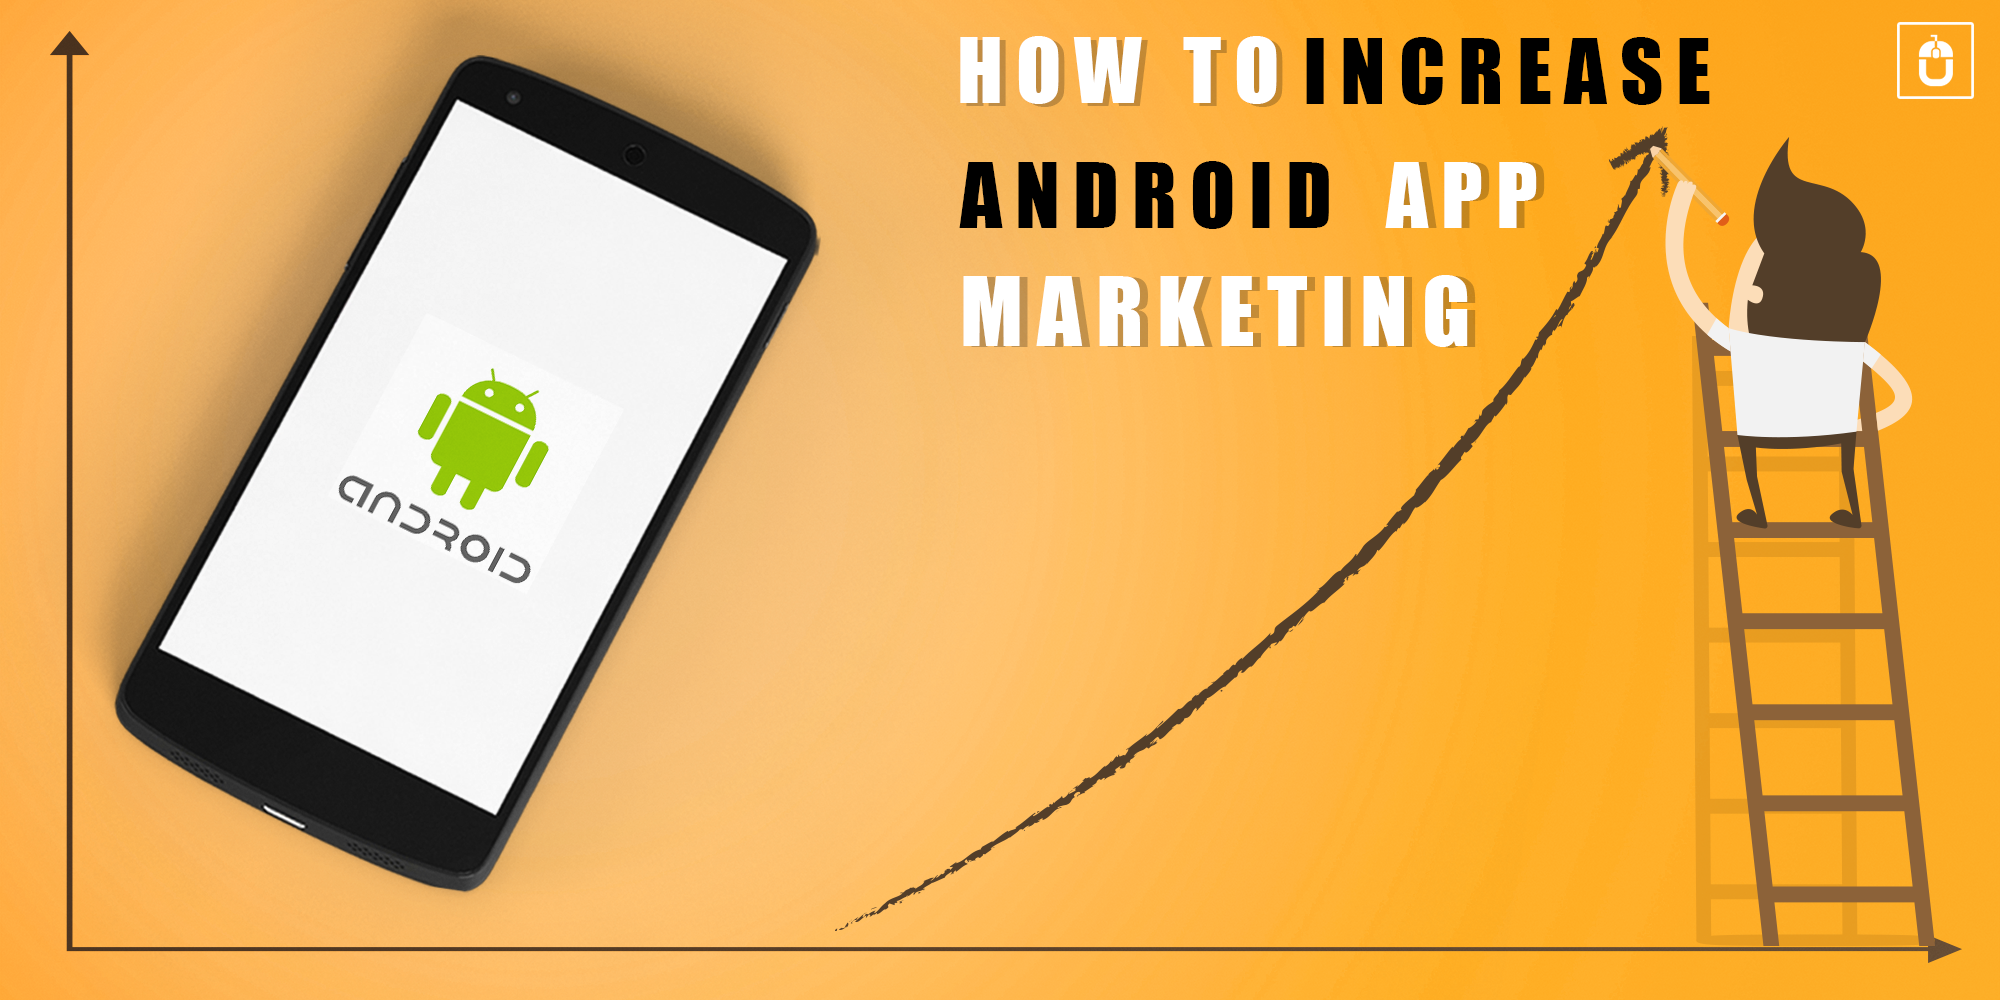 HOW TO INCREASE ANDROID APP MARKETING